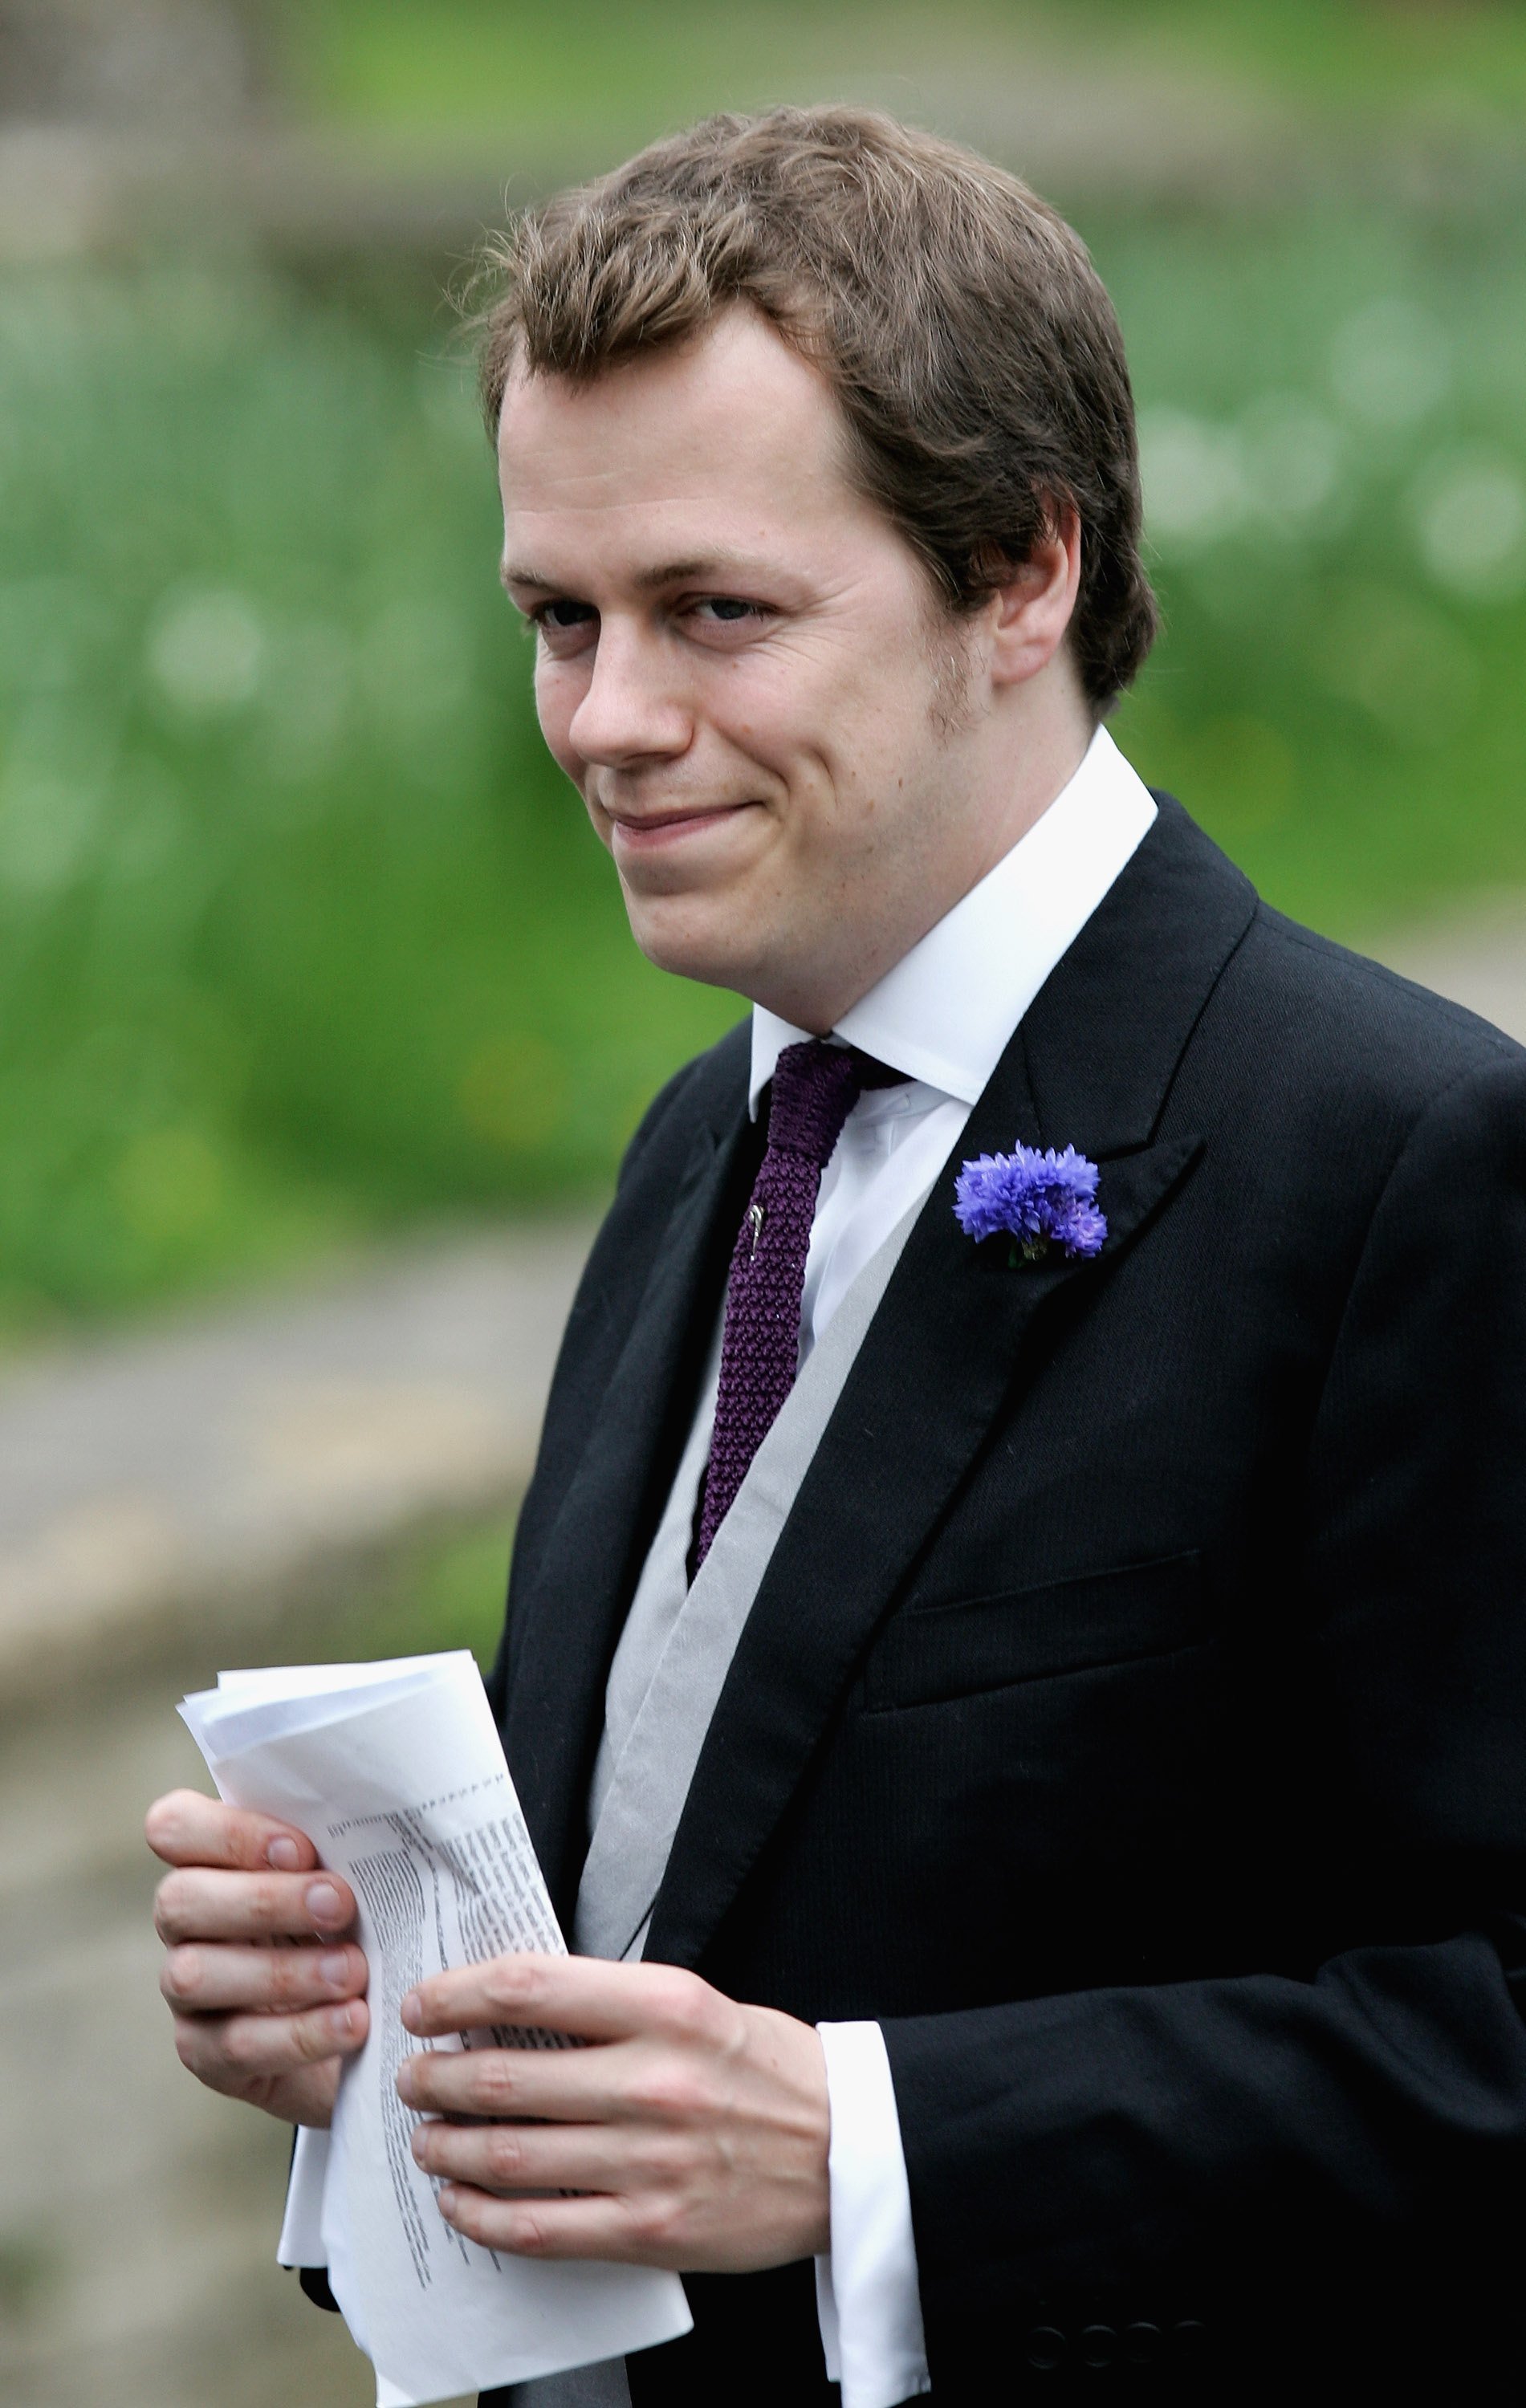 Tom Parker Bowles arrives at St Cyriac's Church, Lacock for the wedding of Harry Lopes and his sister Laura Parker Bowles on May 6, 2006, in Wiltshire, England. | Source: Getty Images